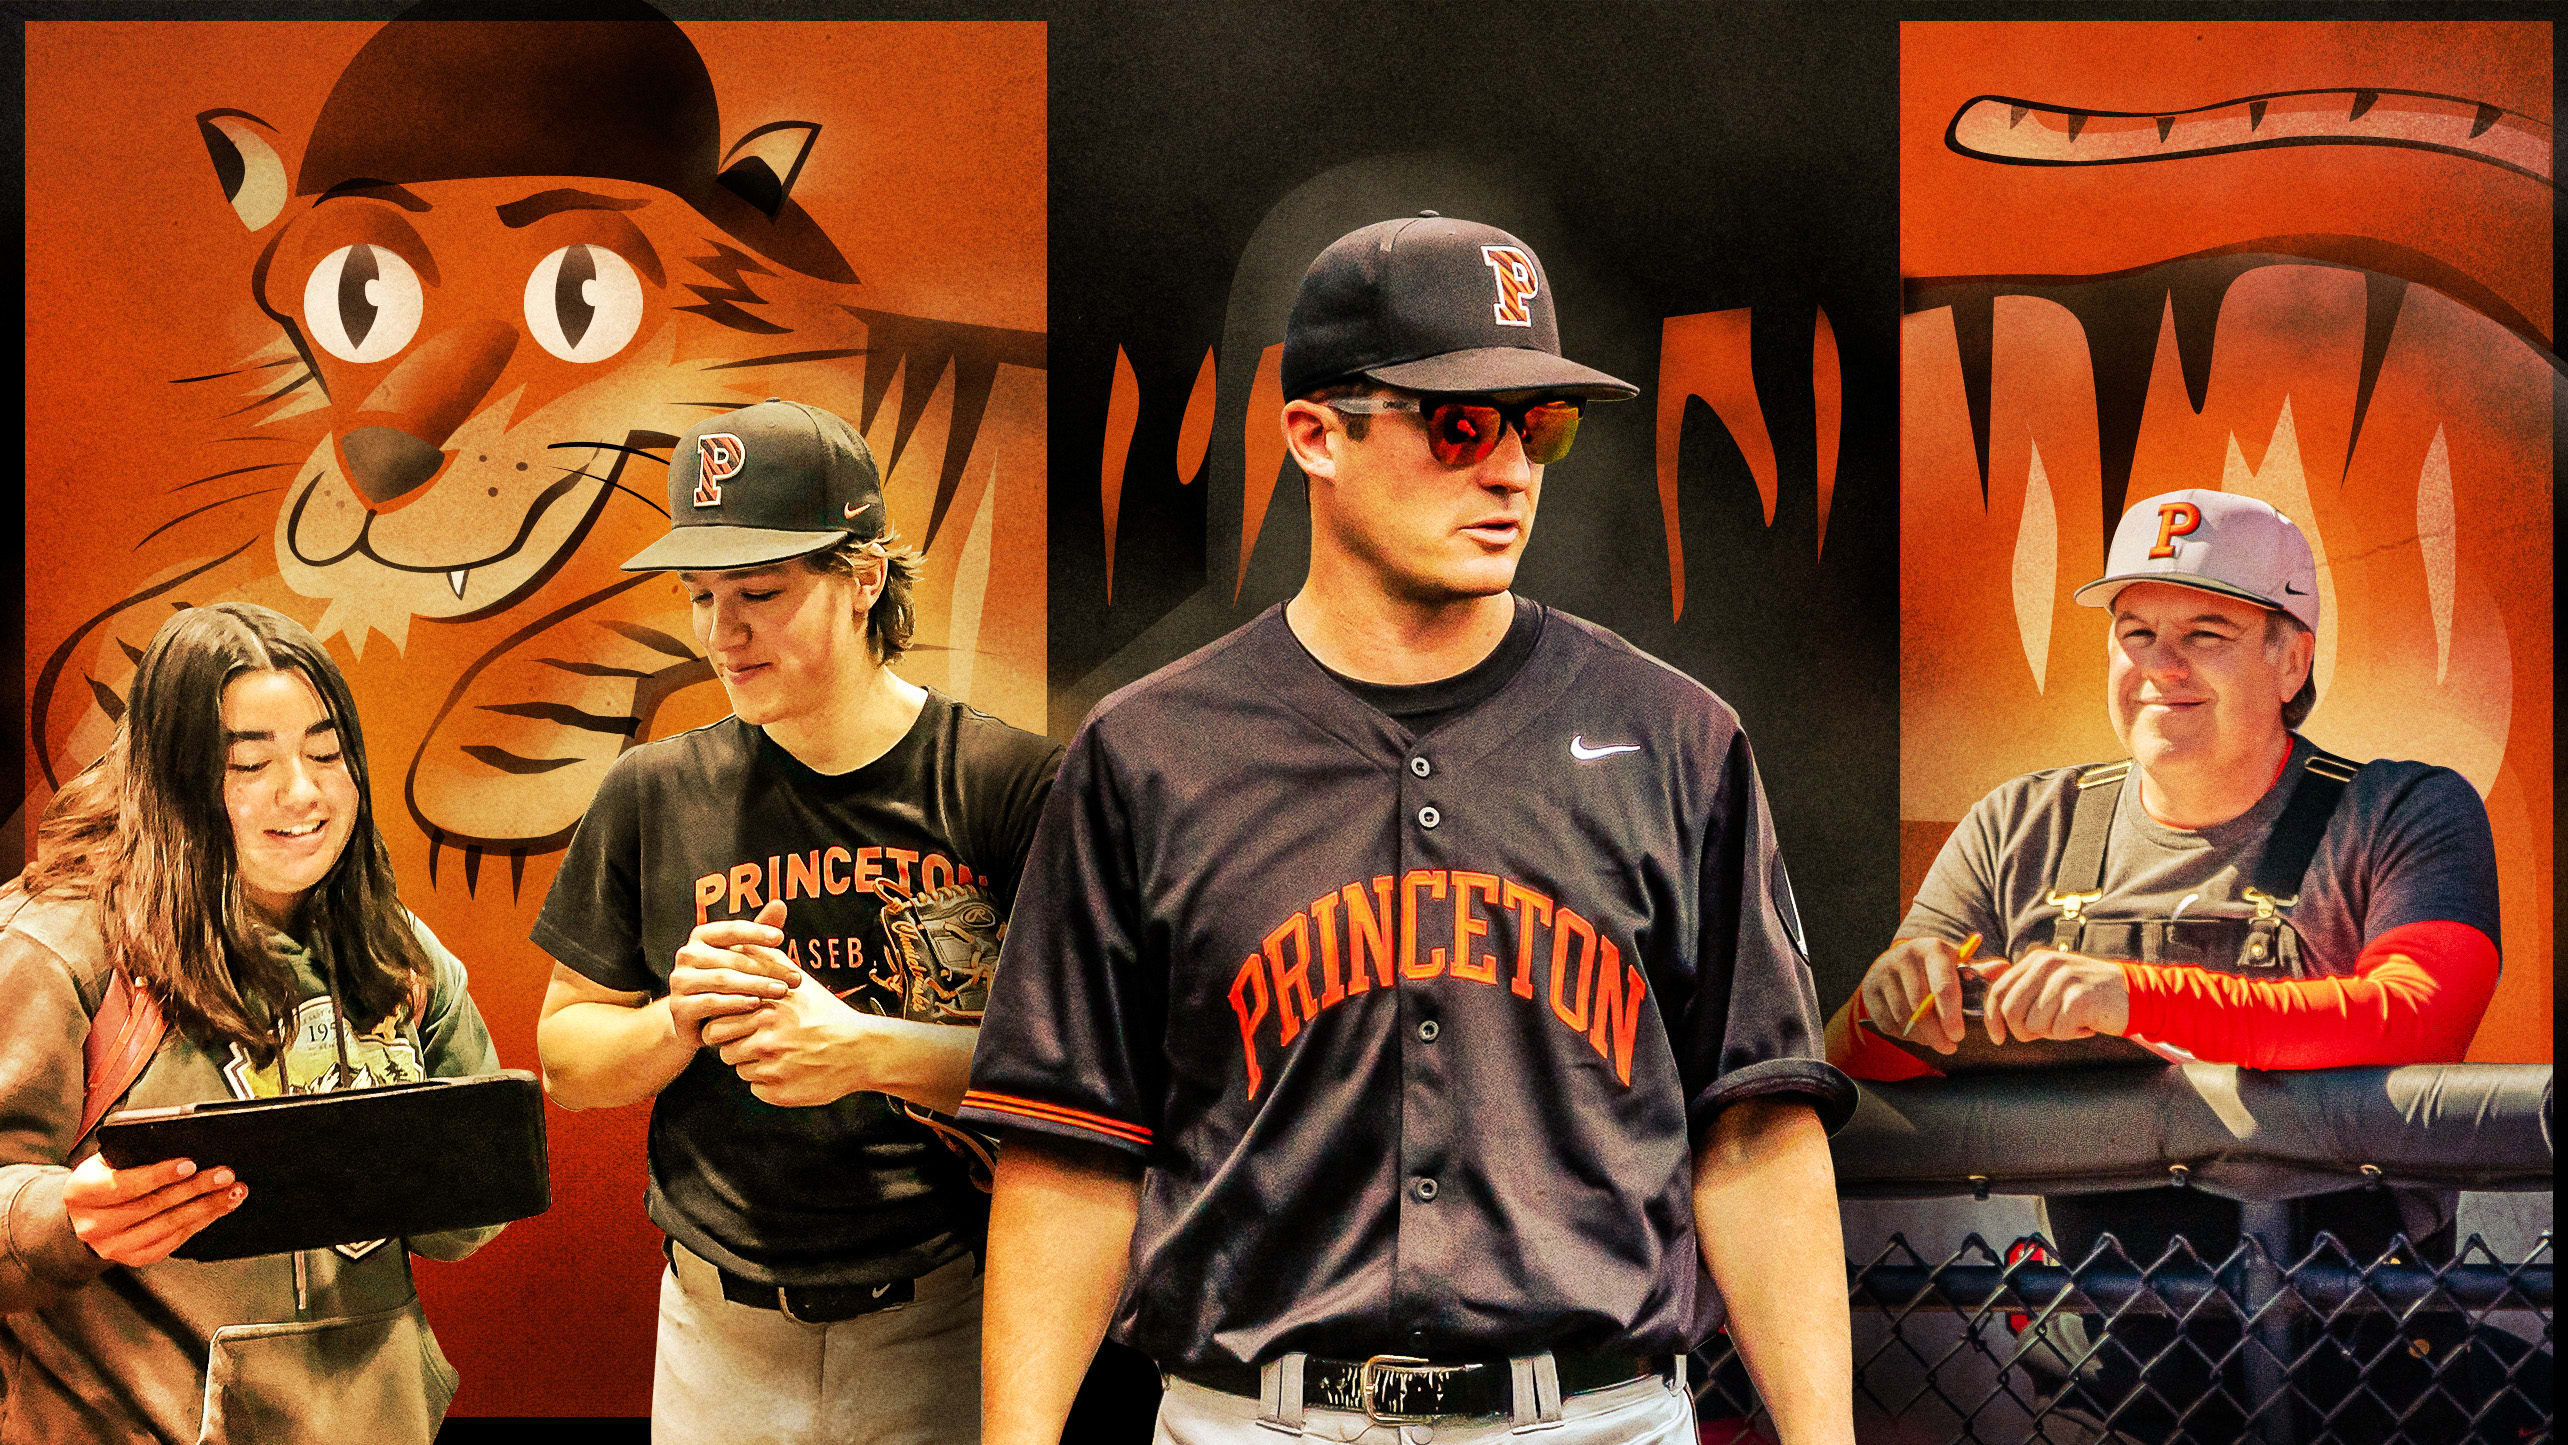 A montage of photos of people involved in the Princeton basball prorgram